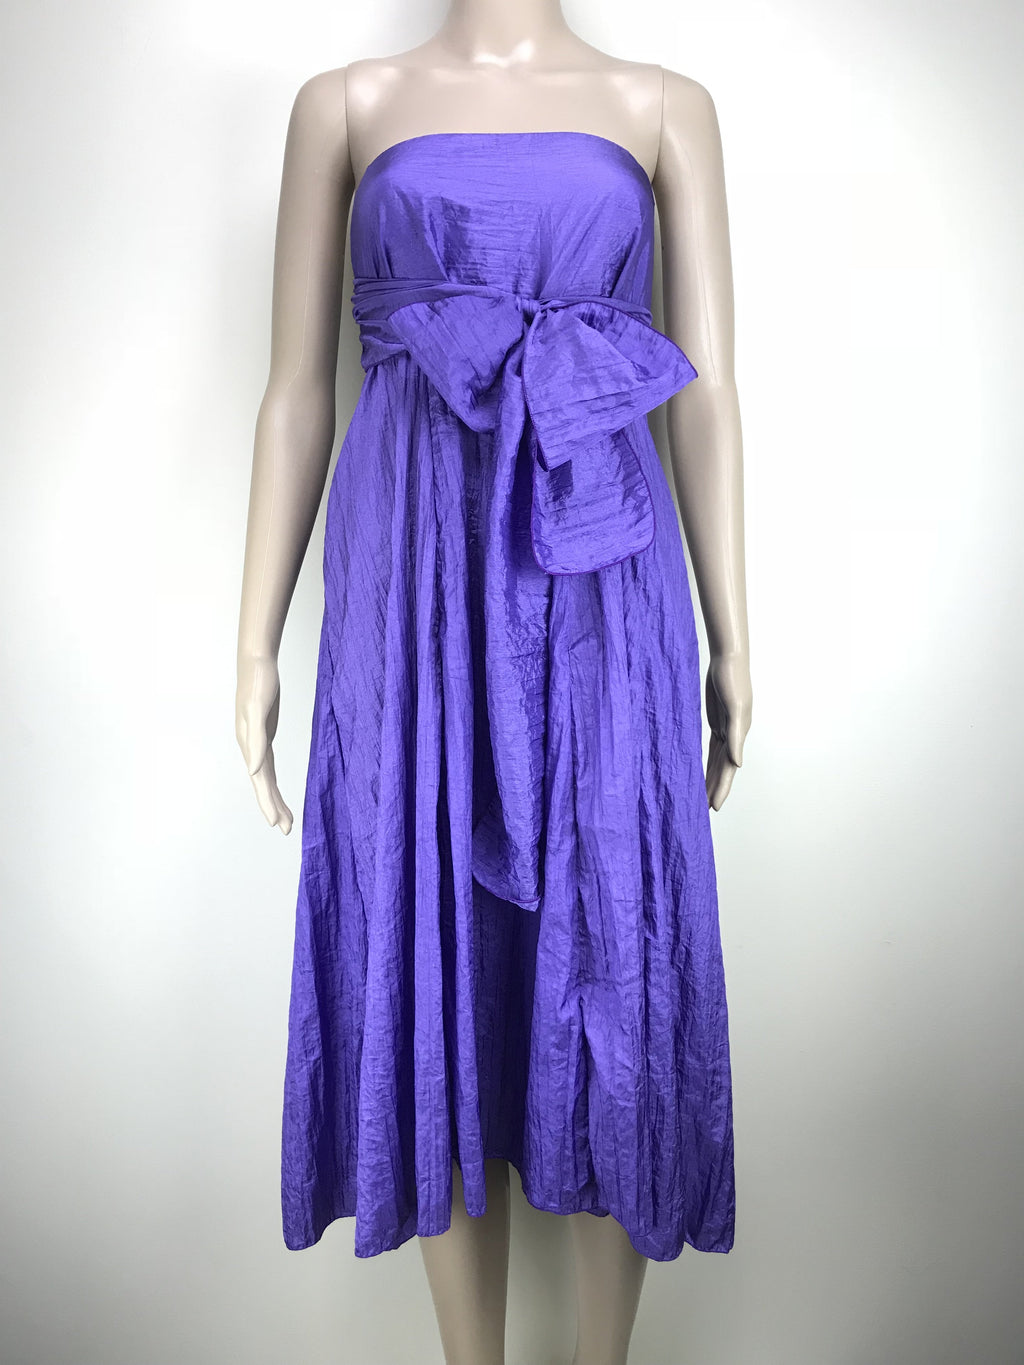 four in one dress or skirt - lilac purple